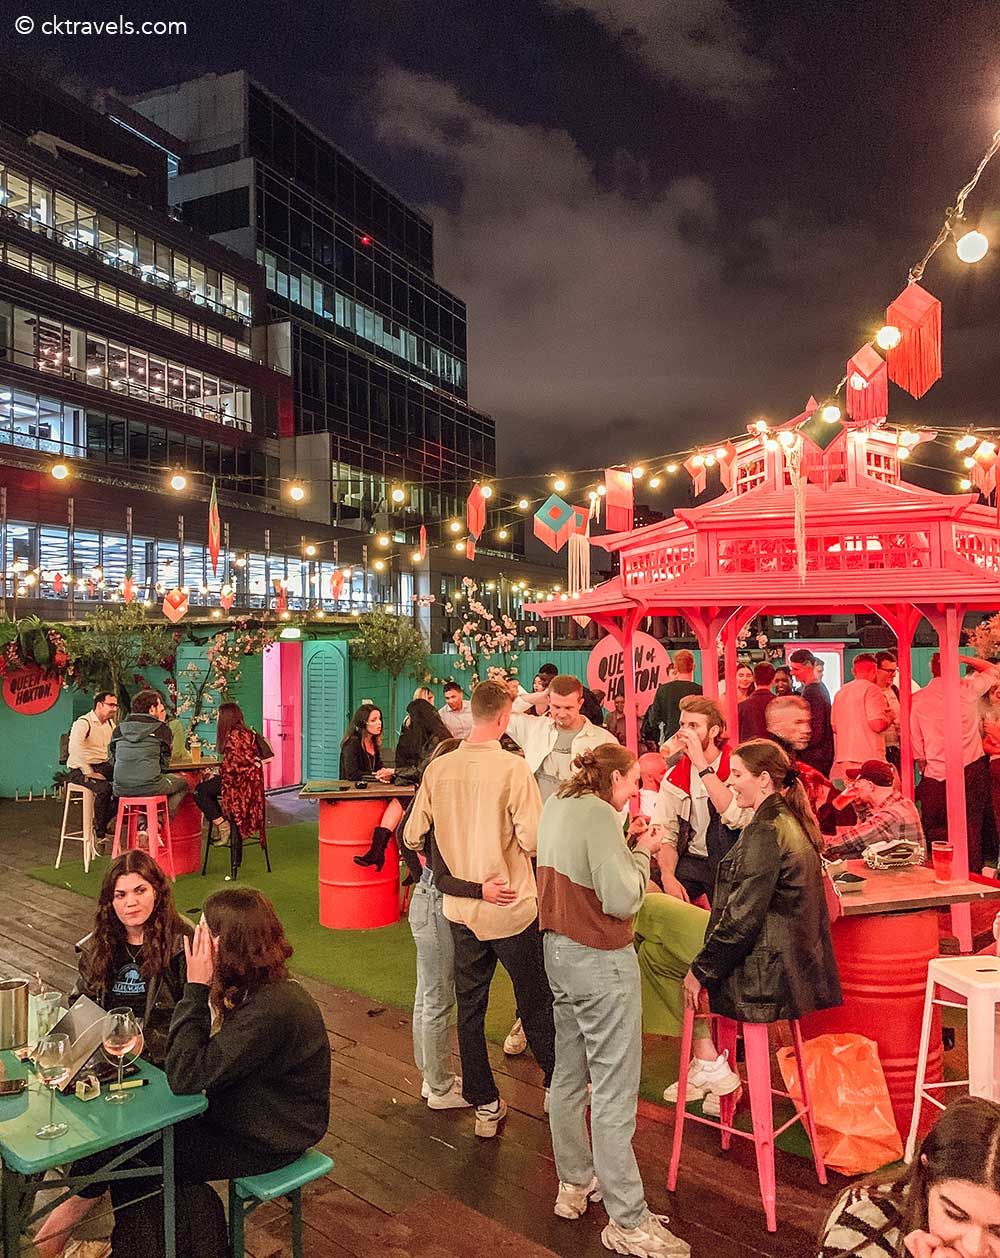 The Queen of Hoxton rooftop bar in Shoreditch